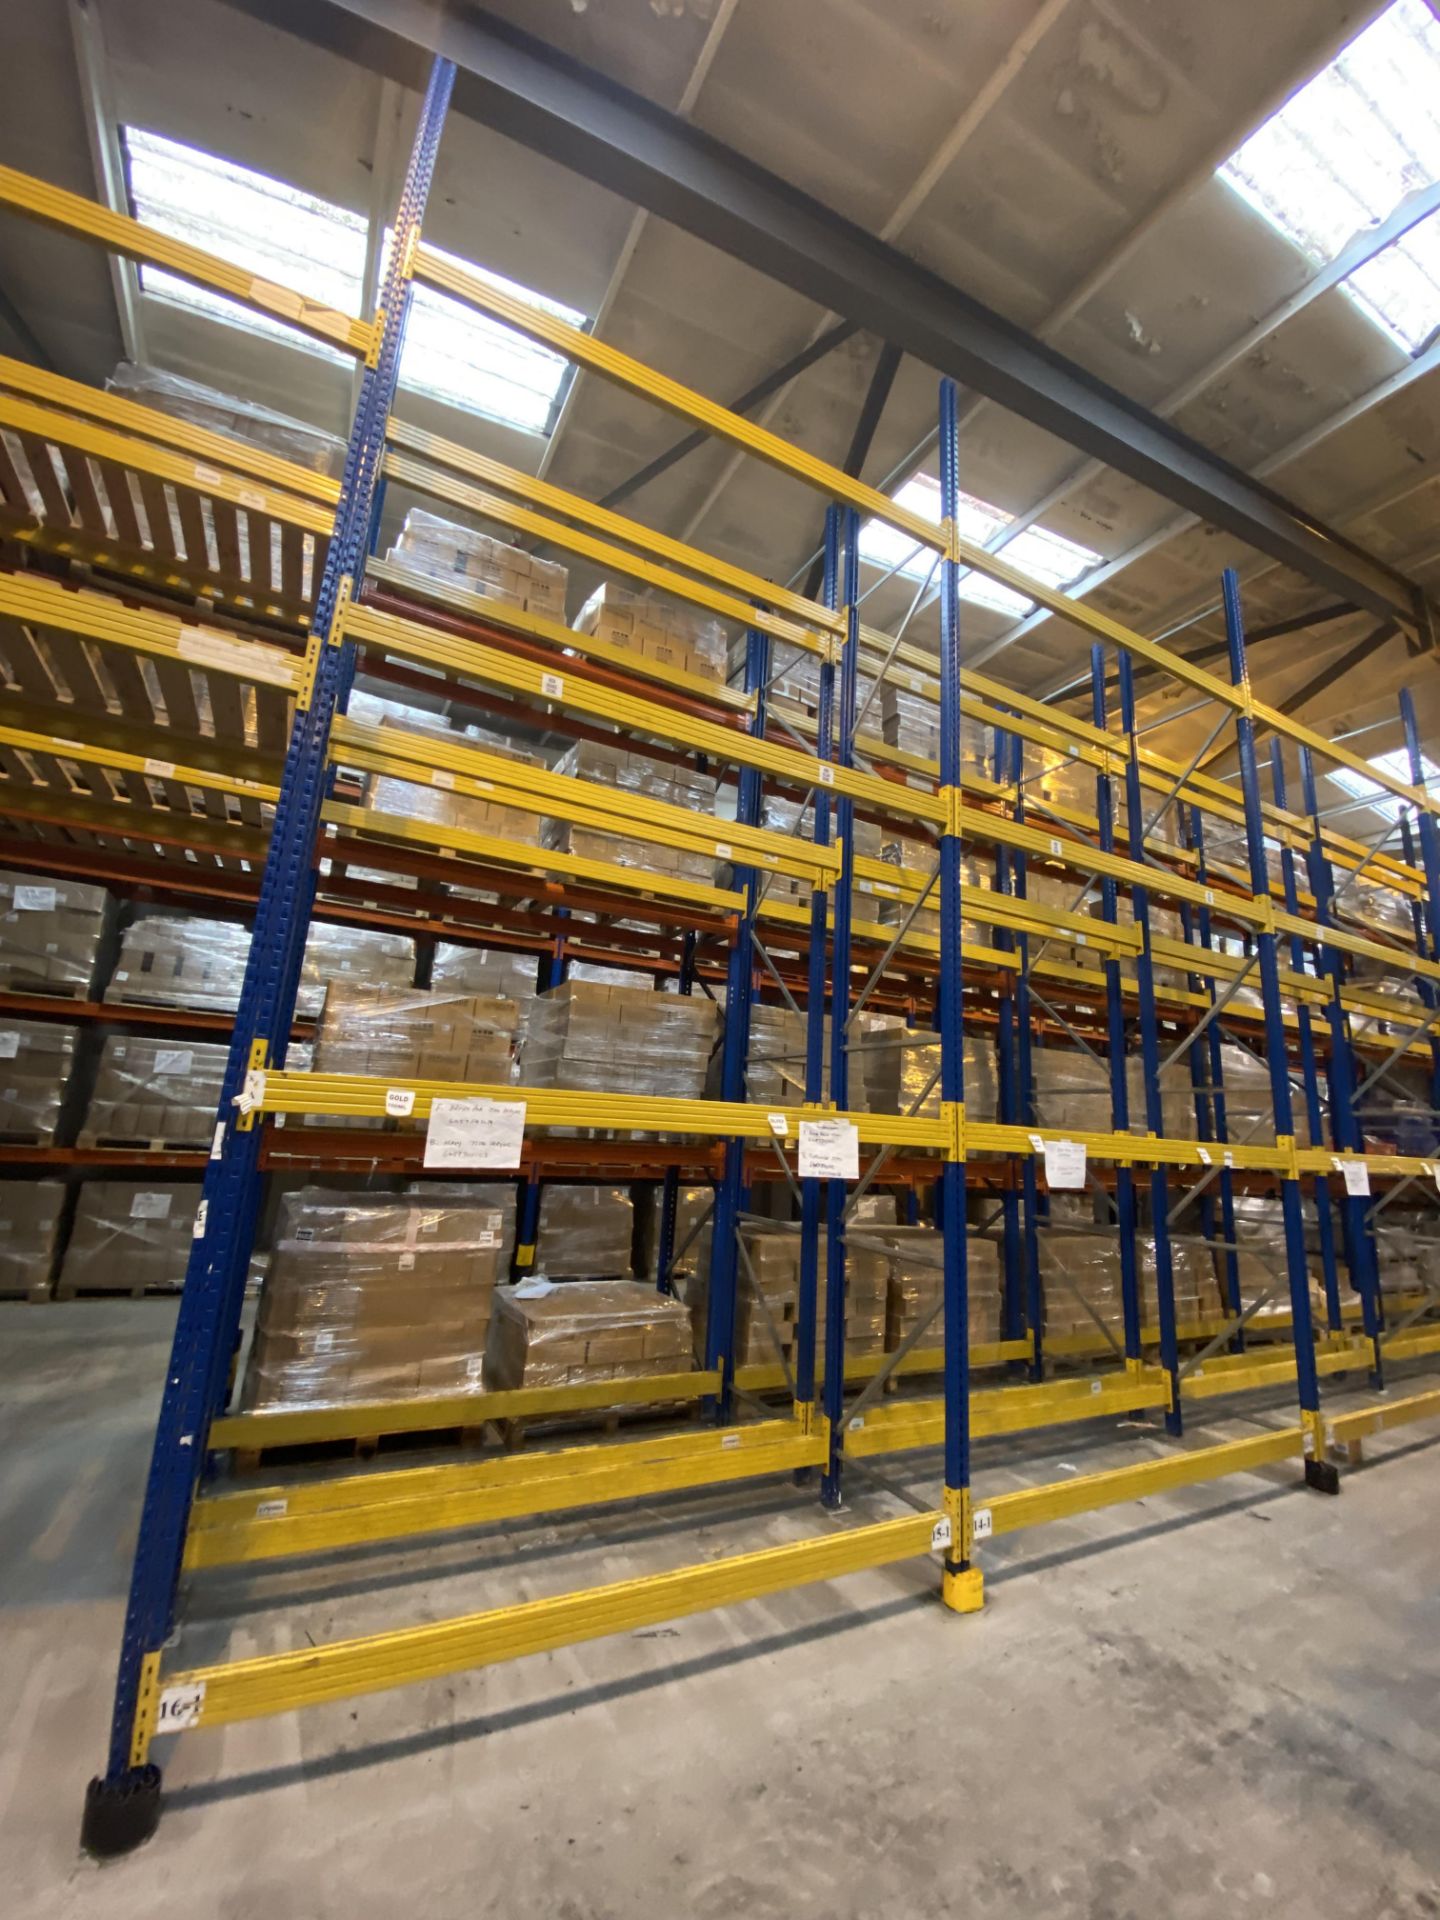 Ten Bay Mainly Four Tier Boltless Pallet Rack, each bay approx. 2.8m x 900mm x 6m high (excluding - Image 2 of 3